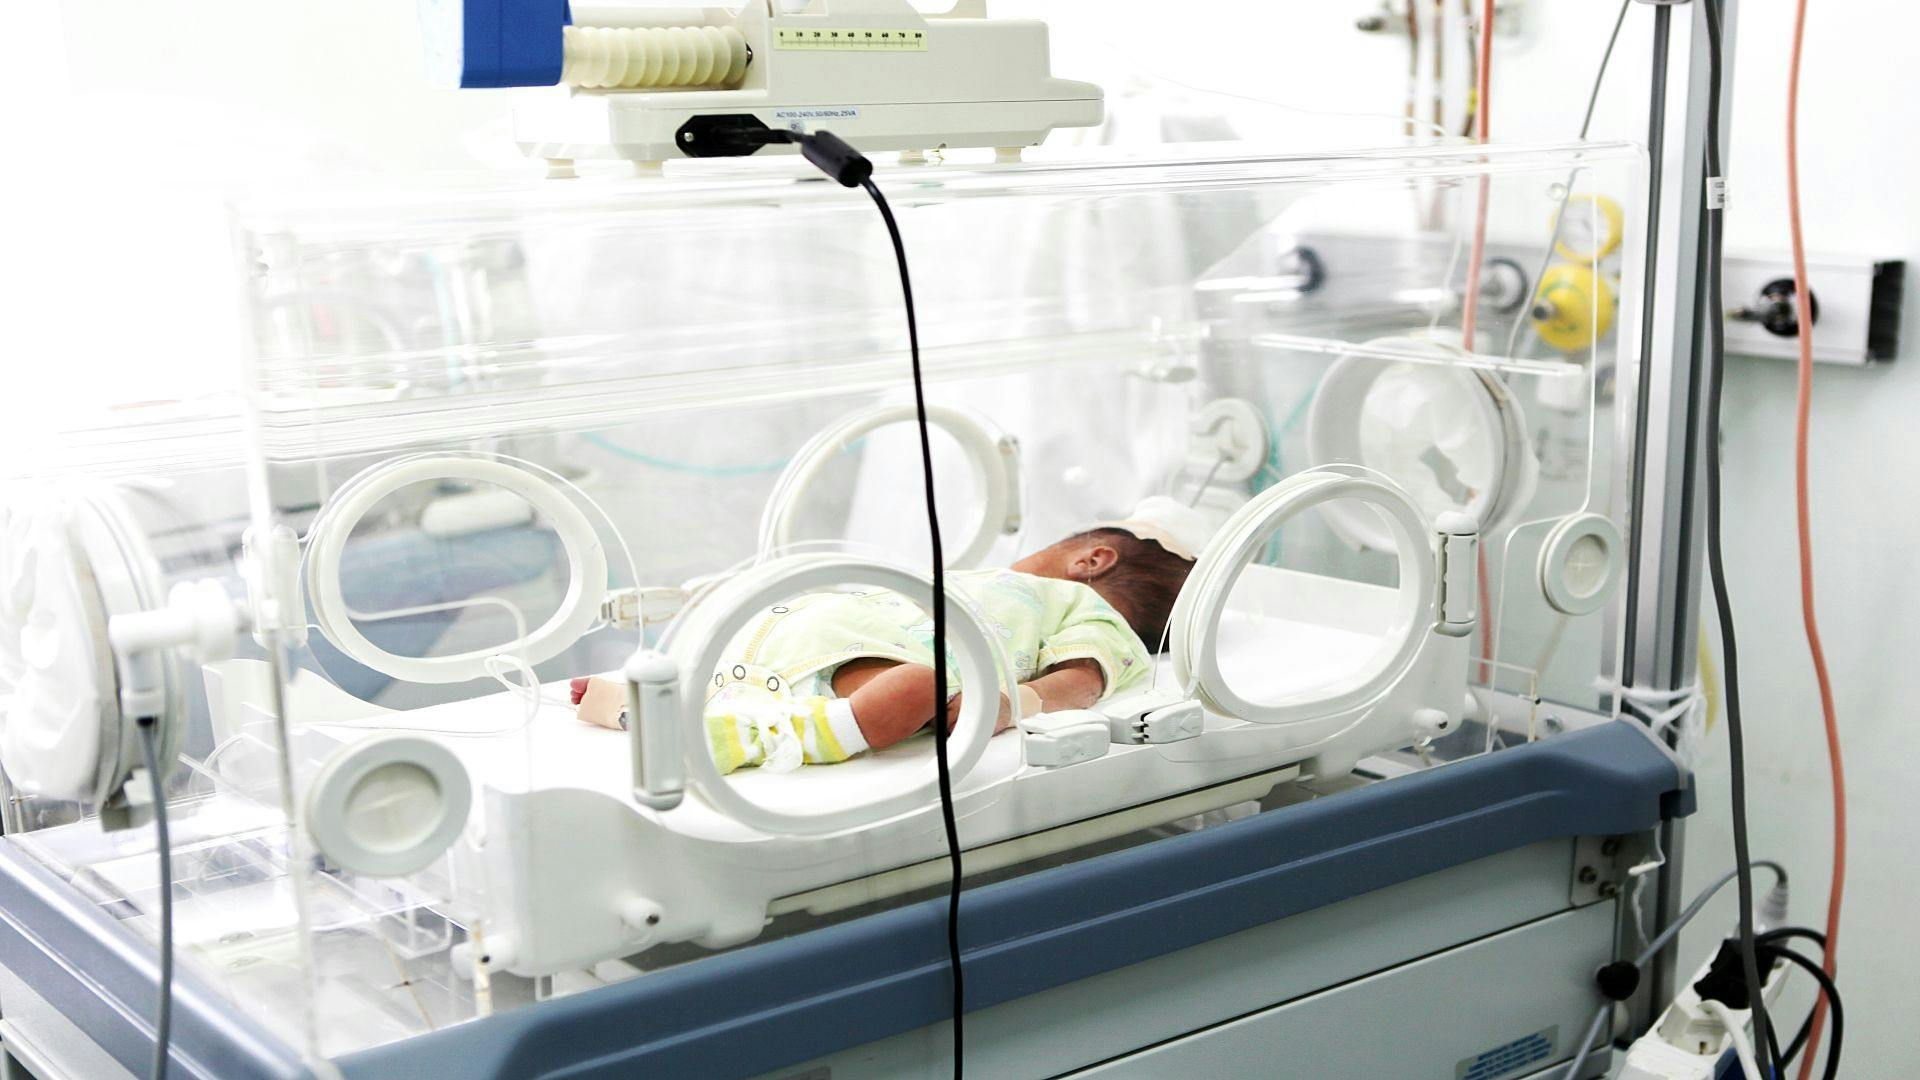 More Frequent Checks Control MRSA in Newborns, but Can Hospitals Afford Them?